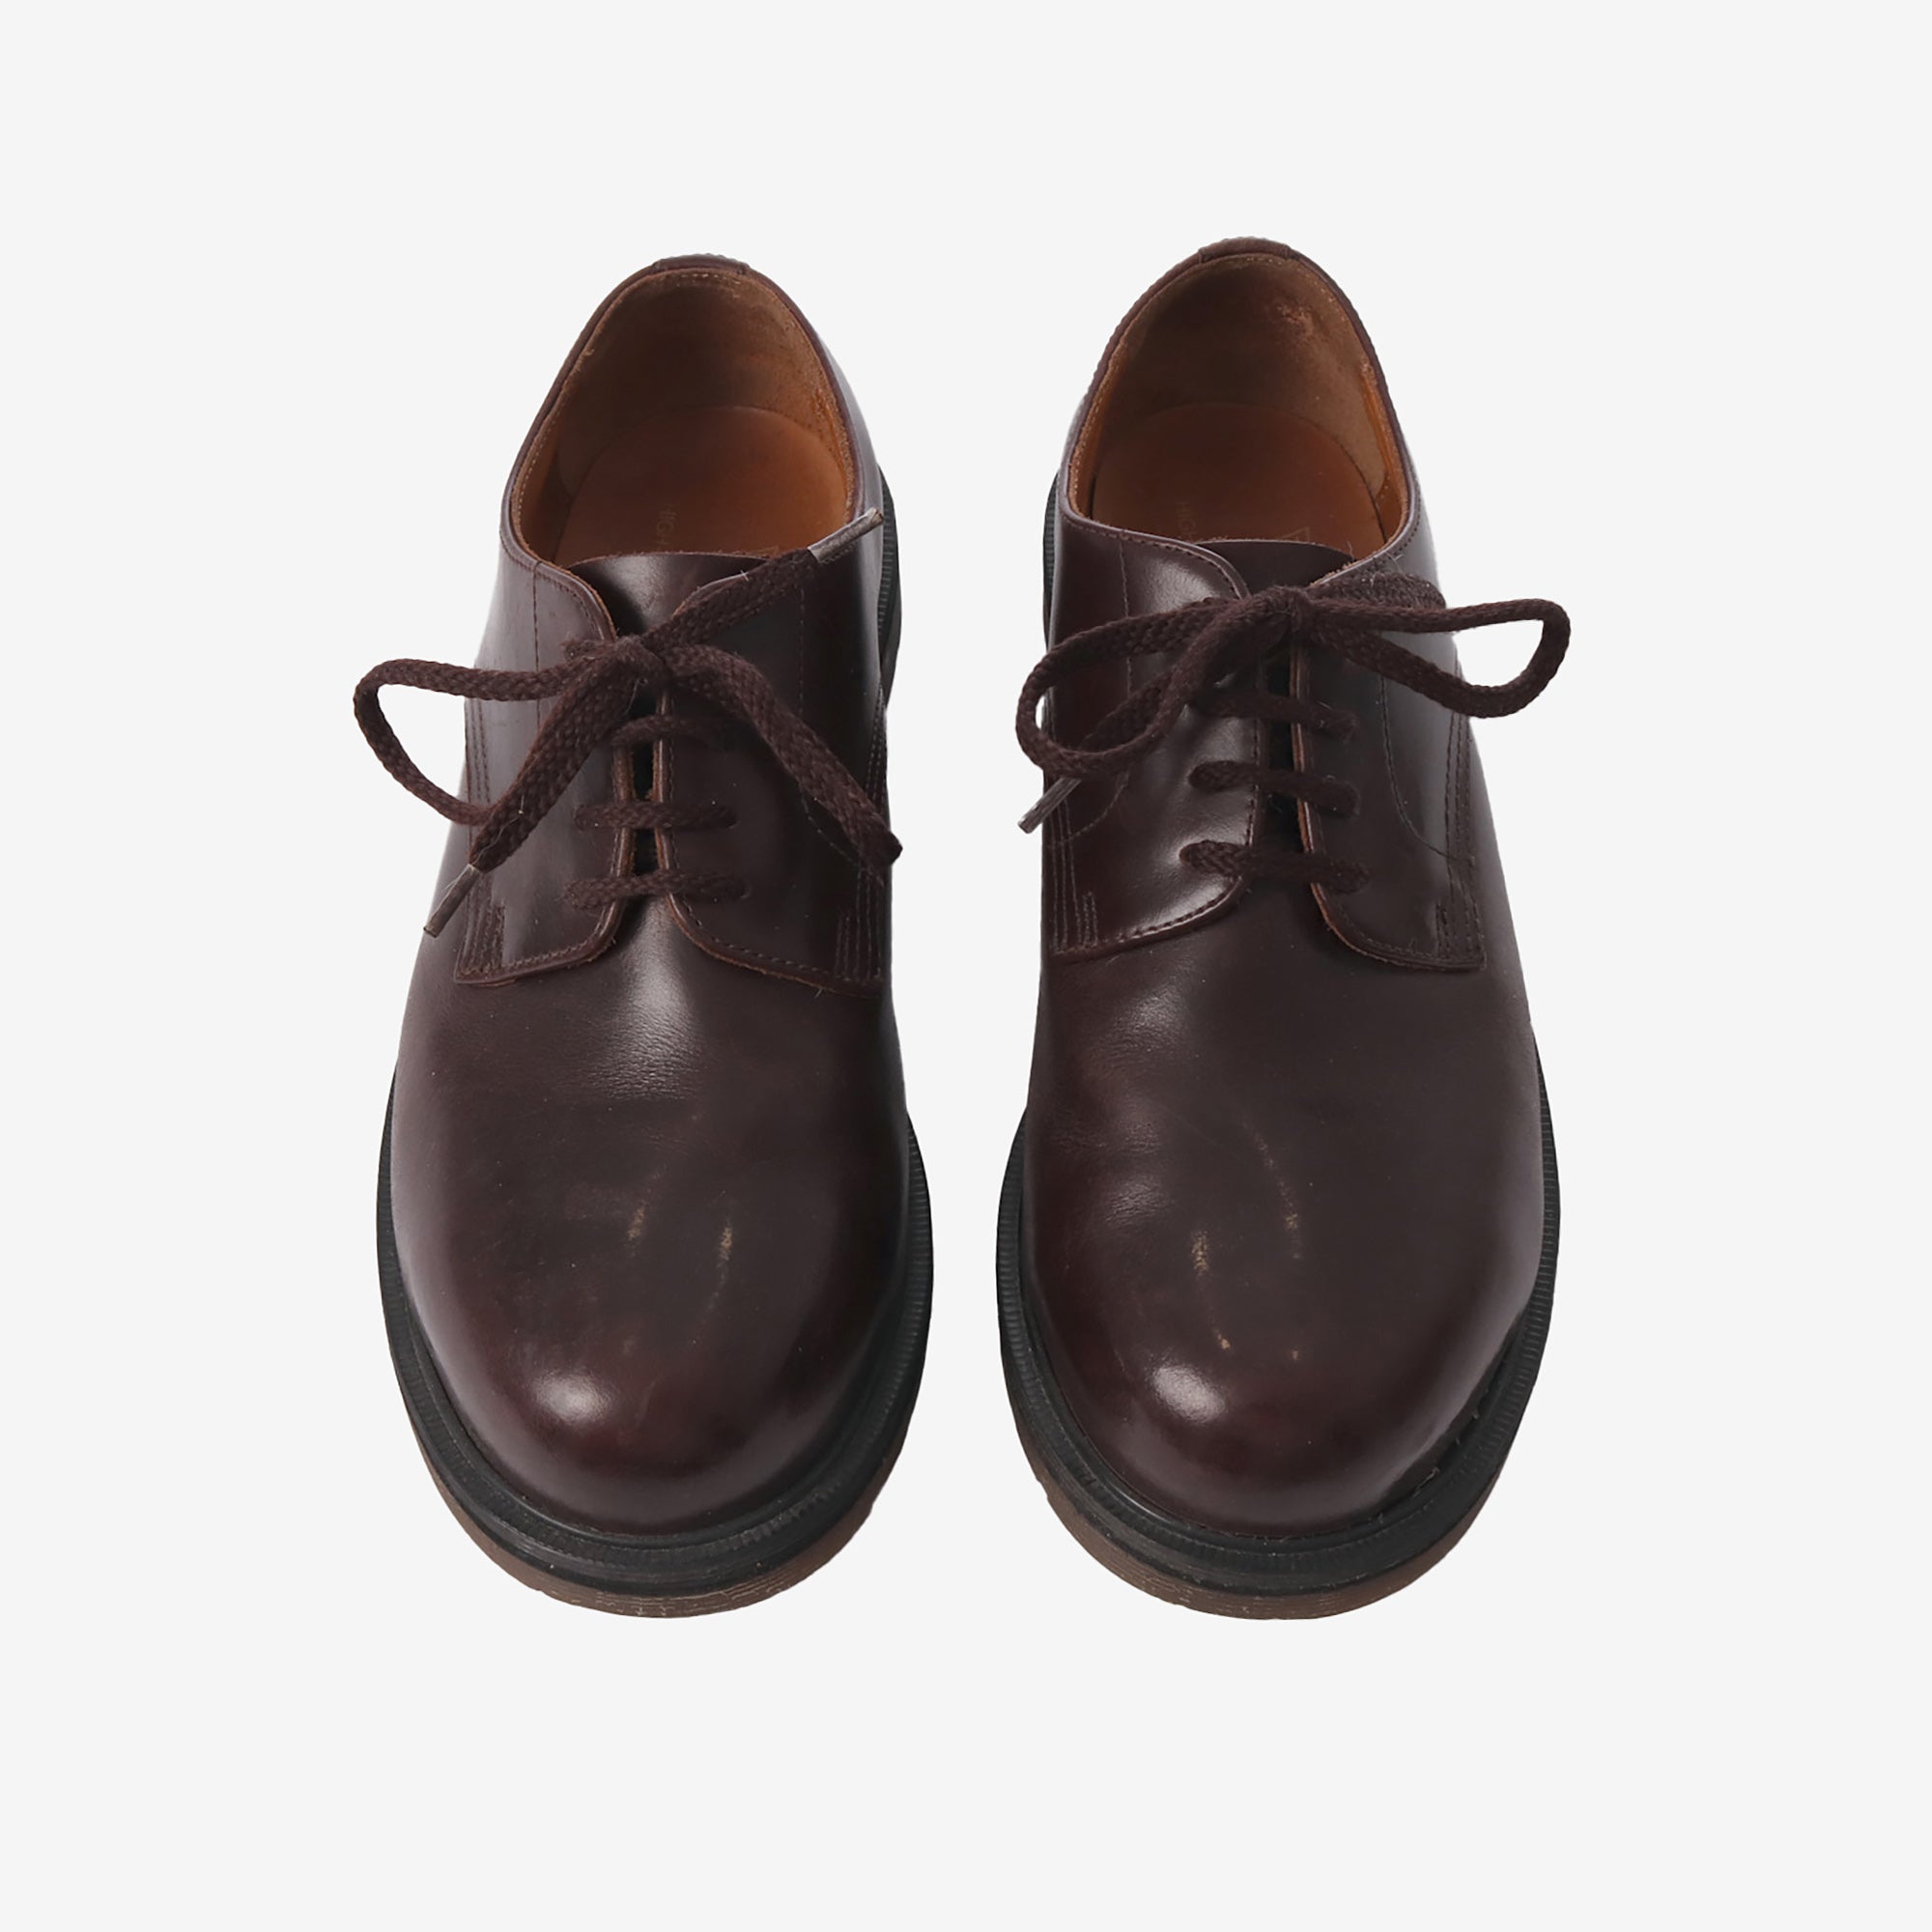 Capped Derby Shoes